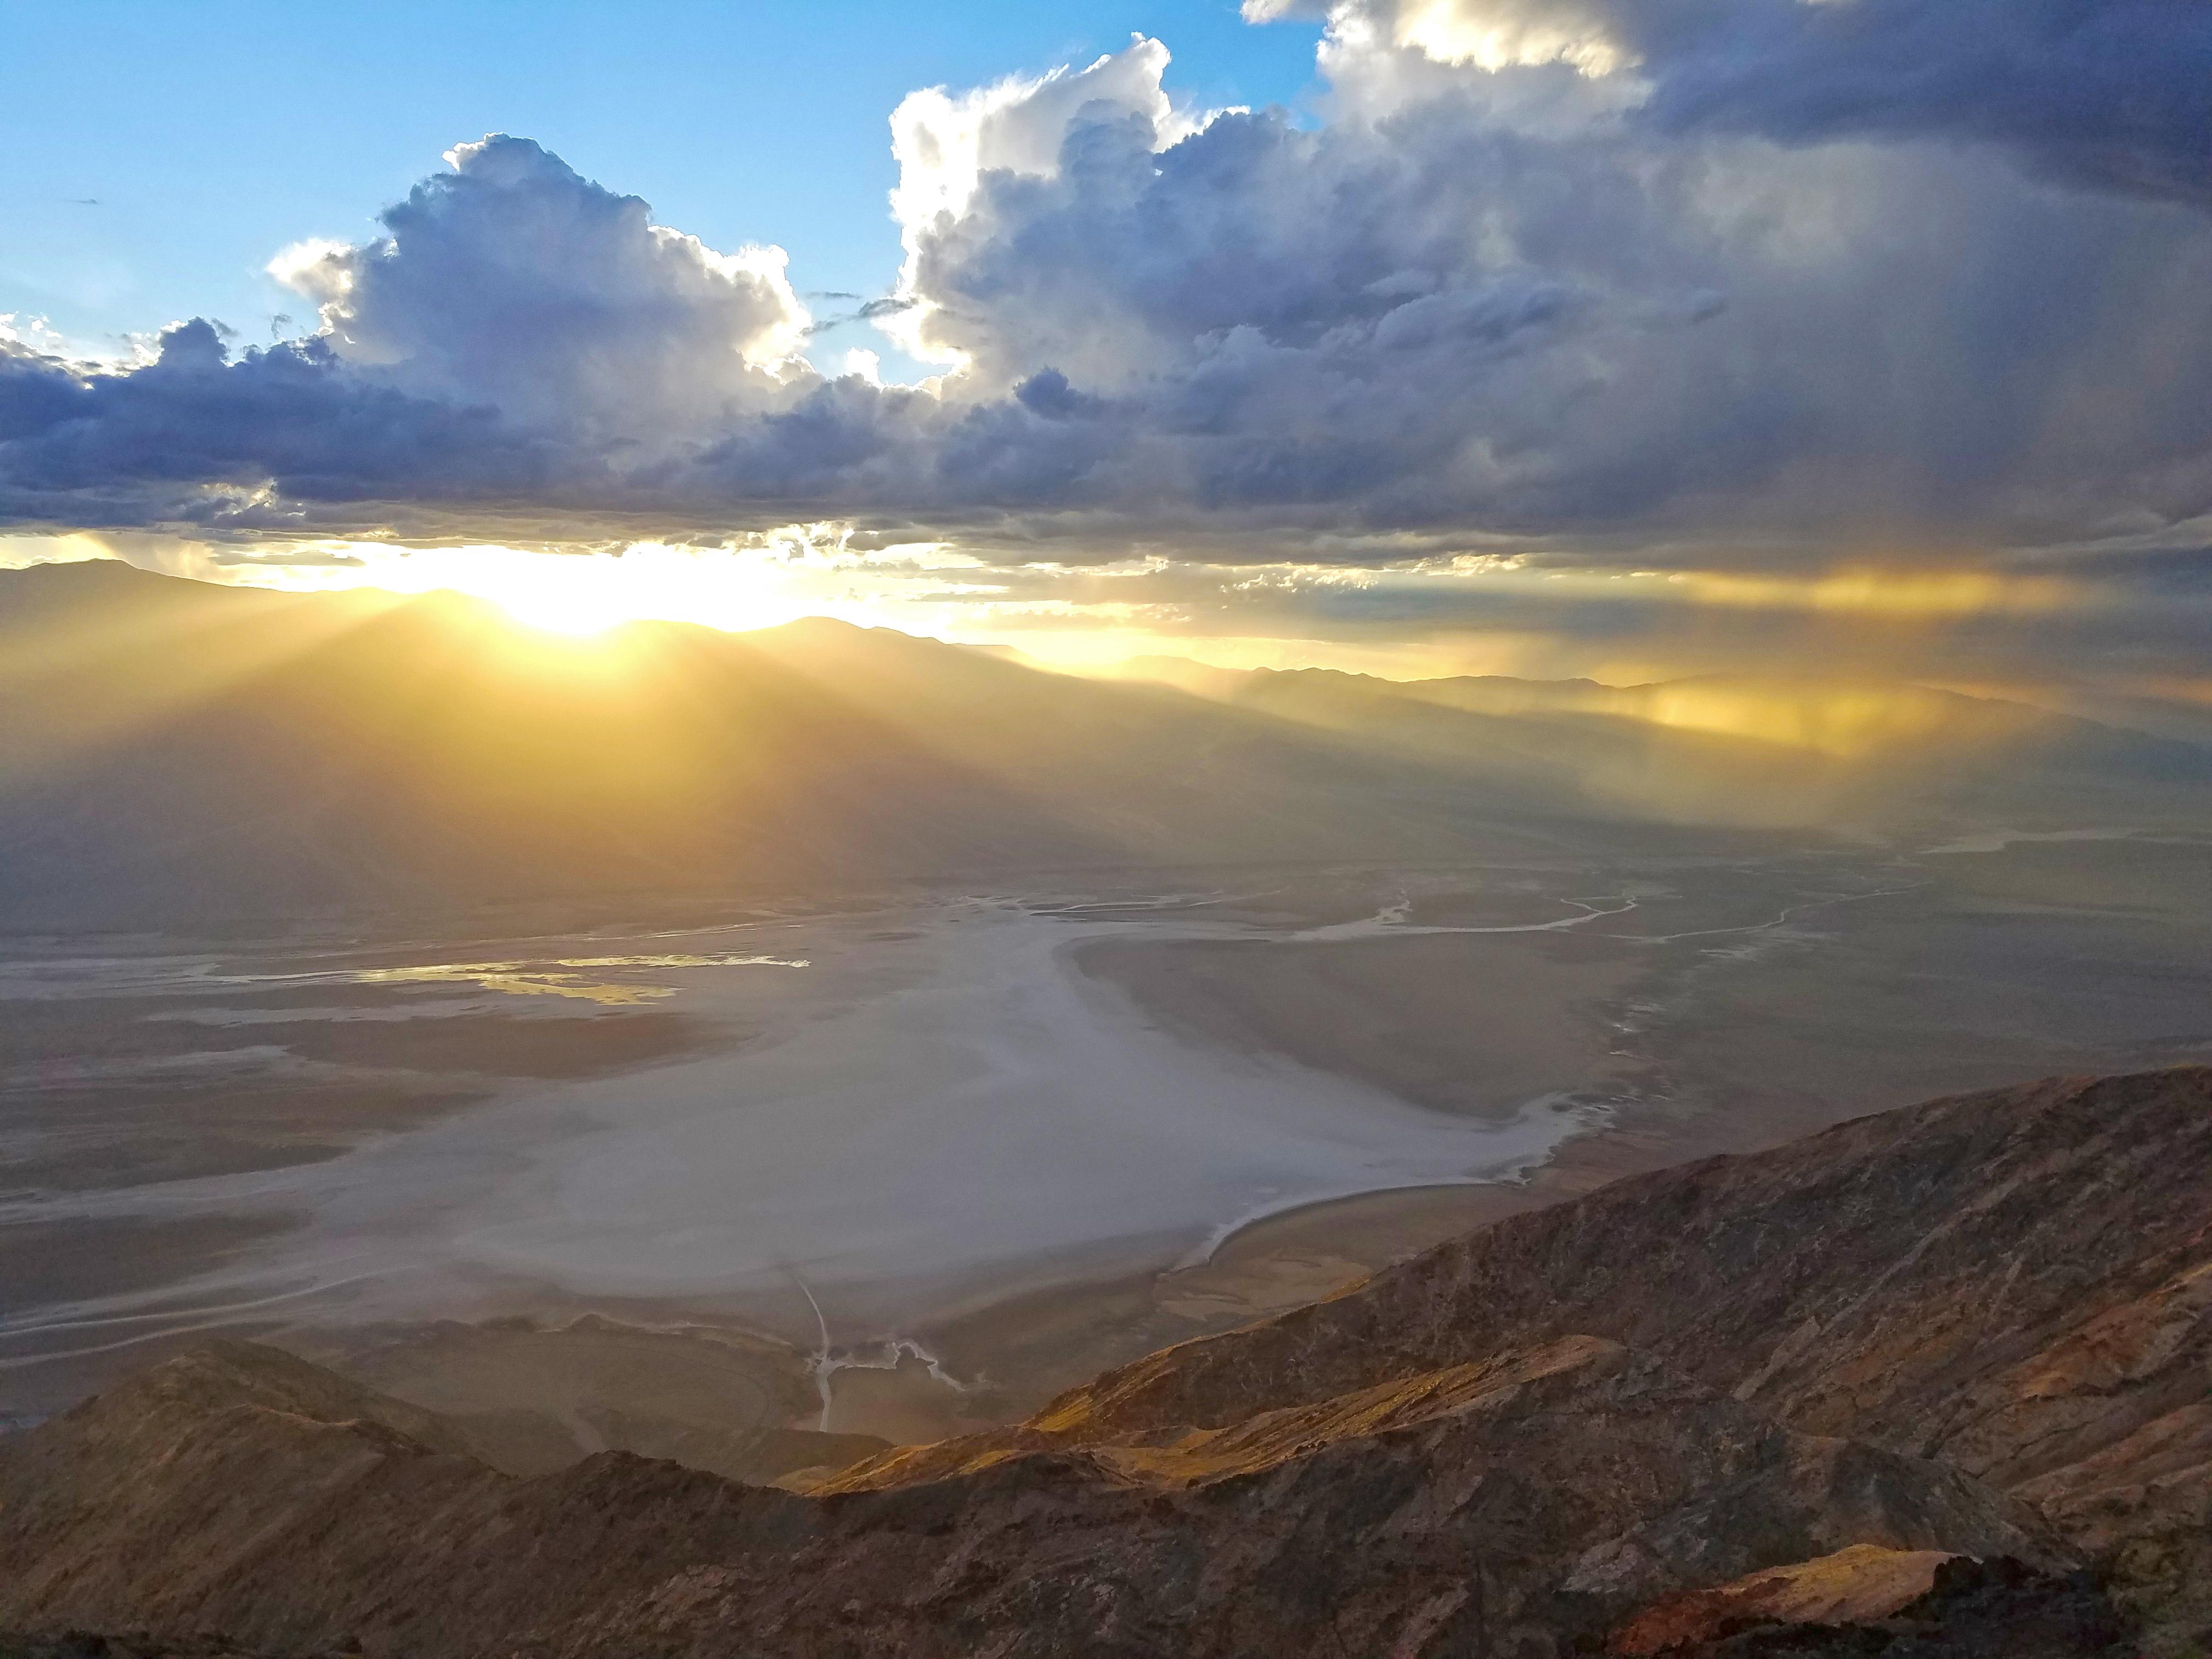 a sunset overlooking a valley filled with white salt